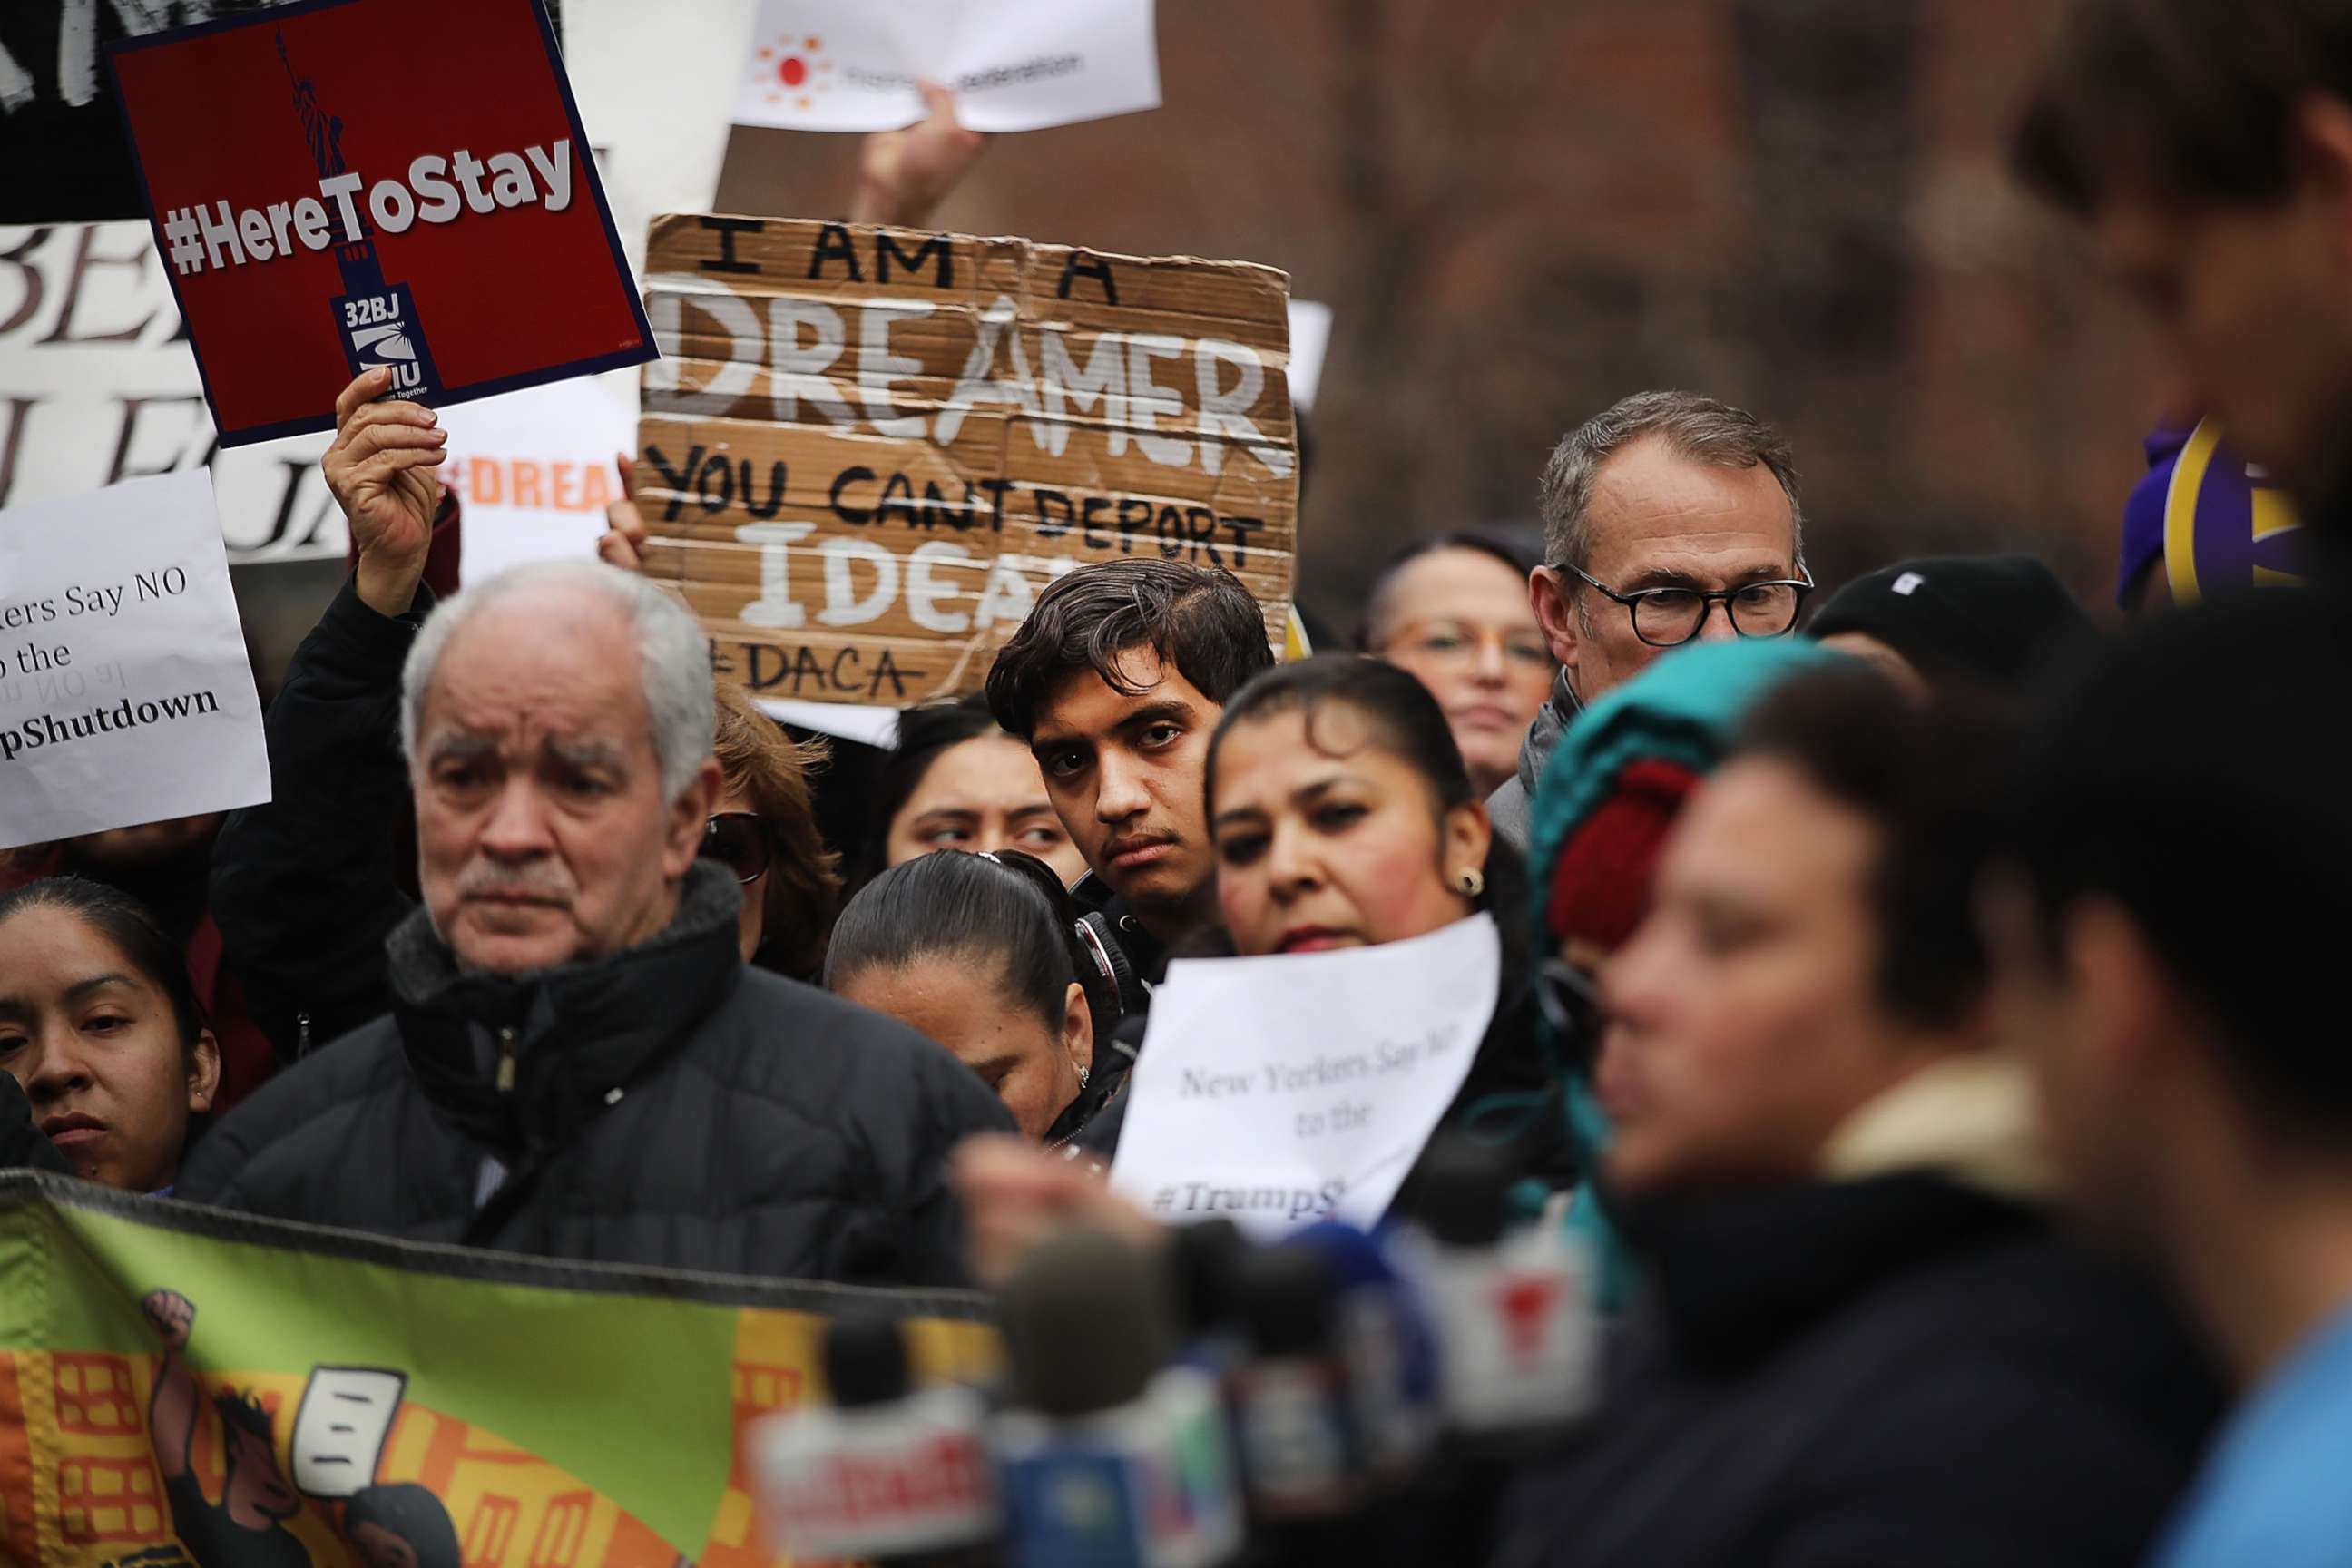 PHOTO: Demonstrators protest the government shutdown and the lack of a deal on DACA outside of Federal Plaza on Jan. 22, 2018, in New York.